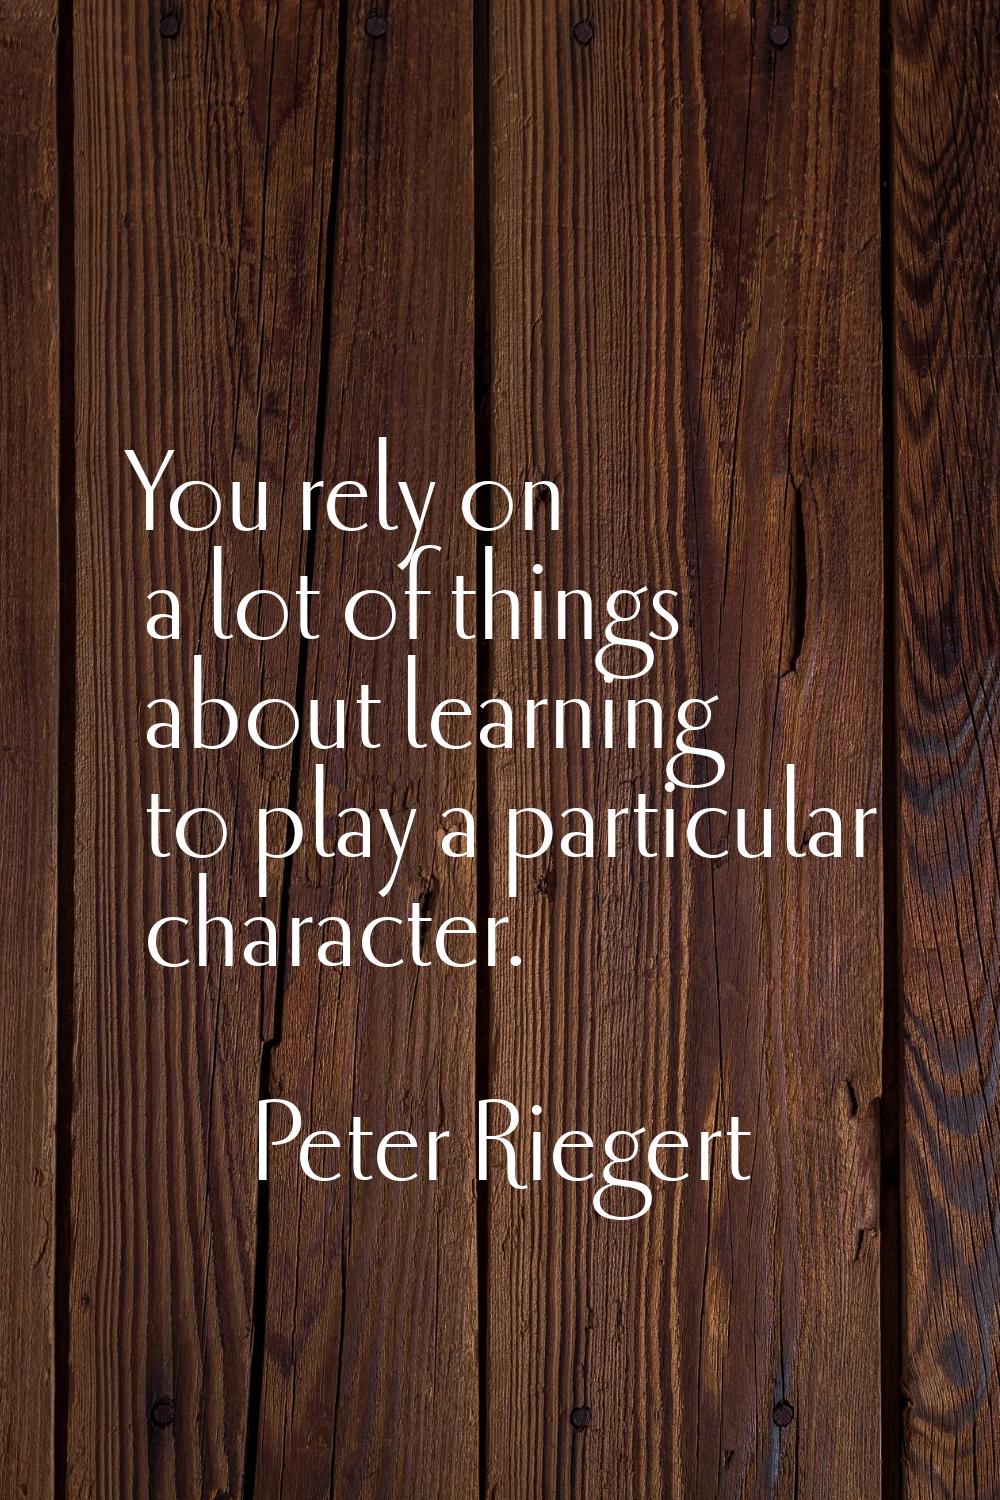 You rely on a lot of things about learning to play a particular character.